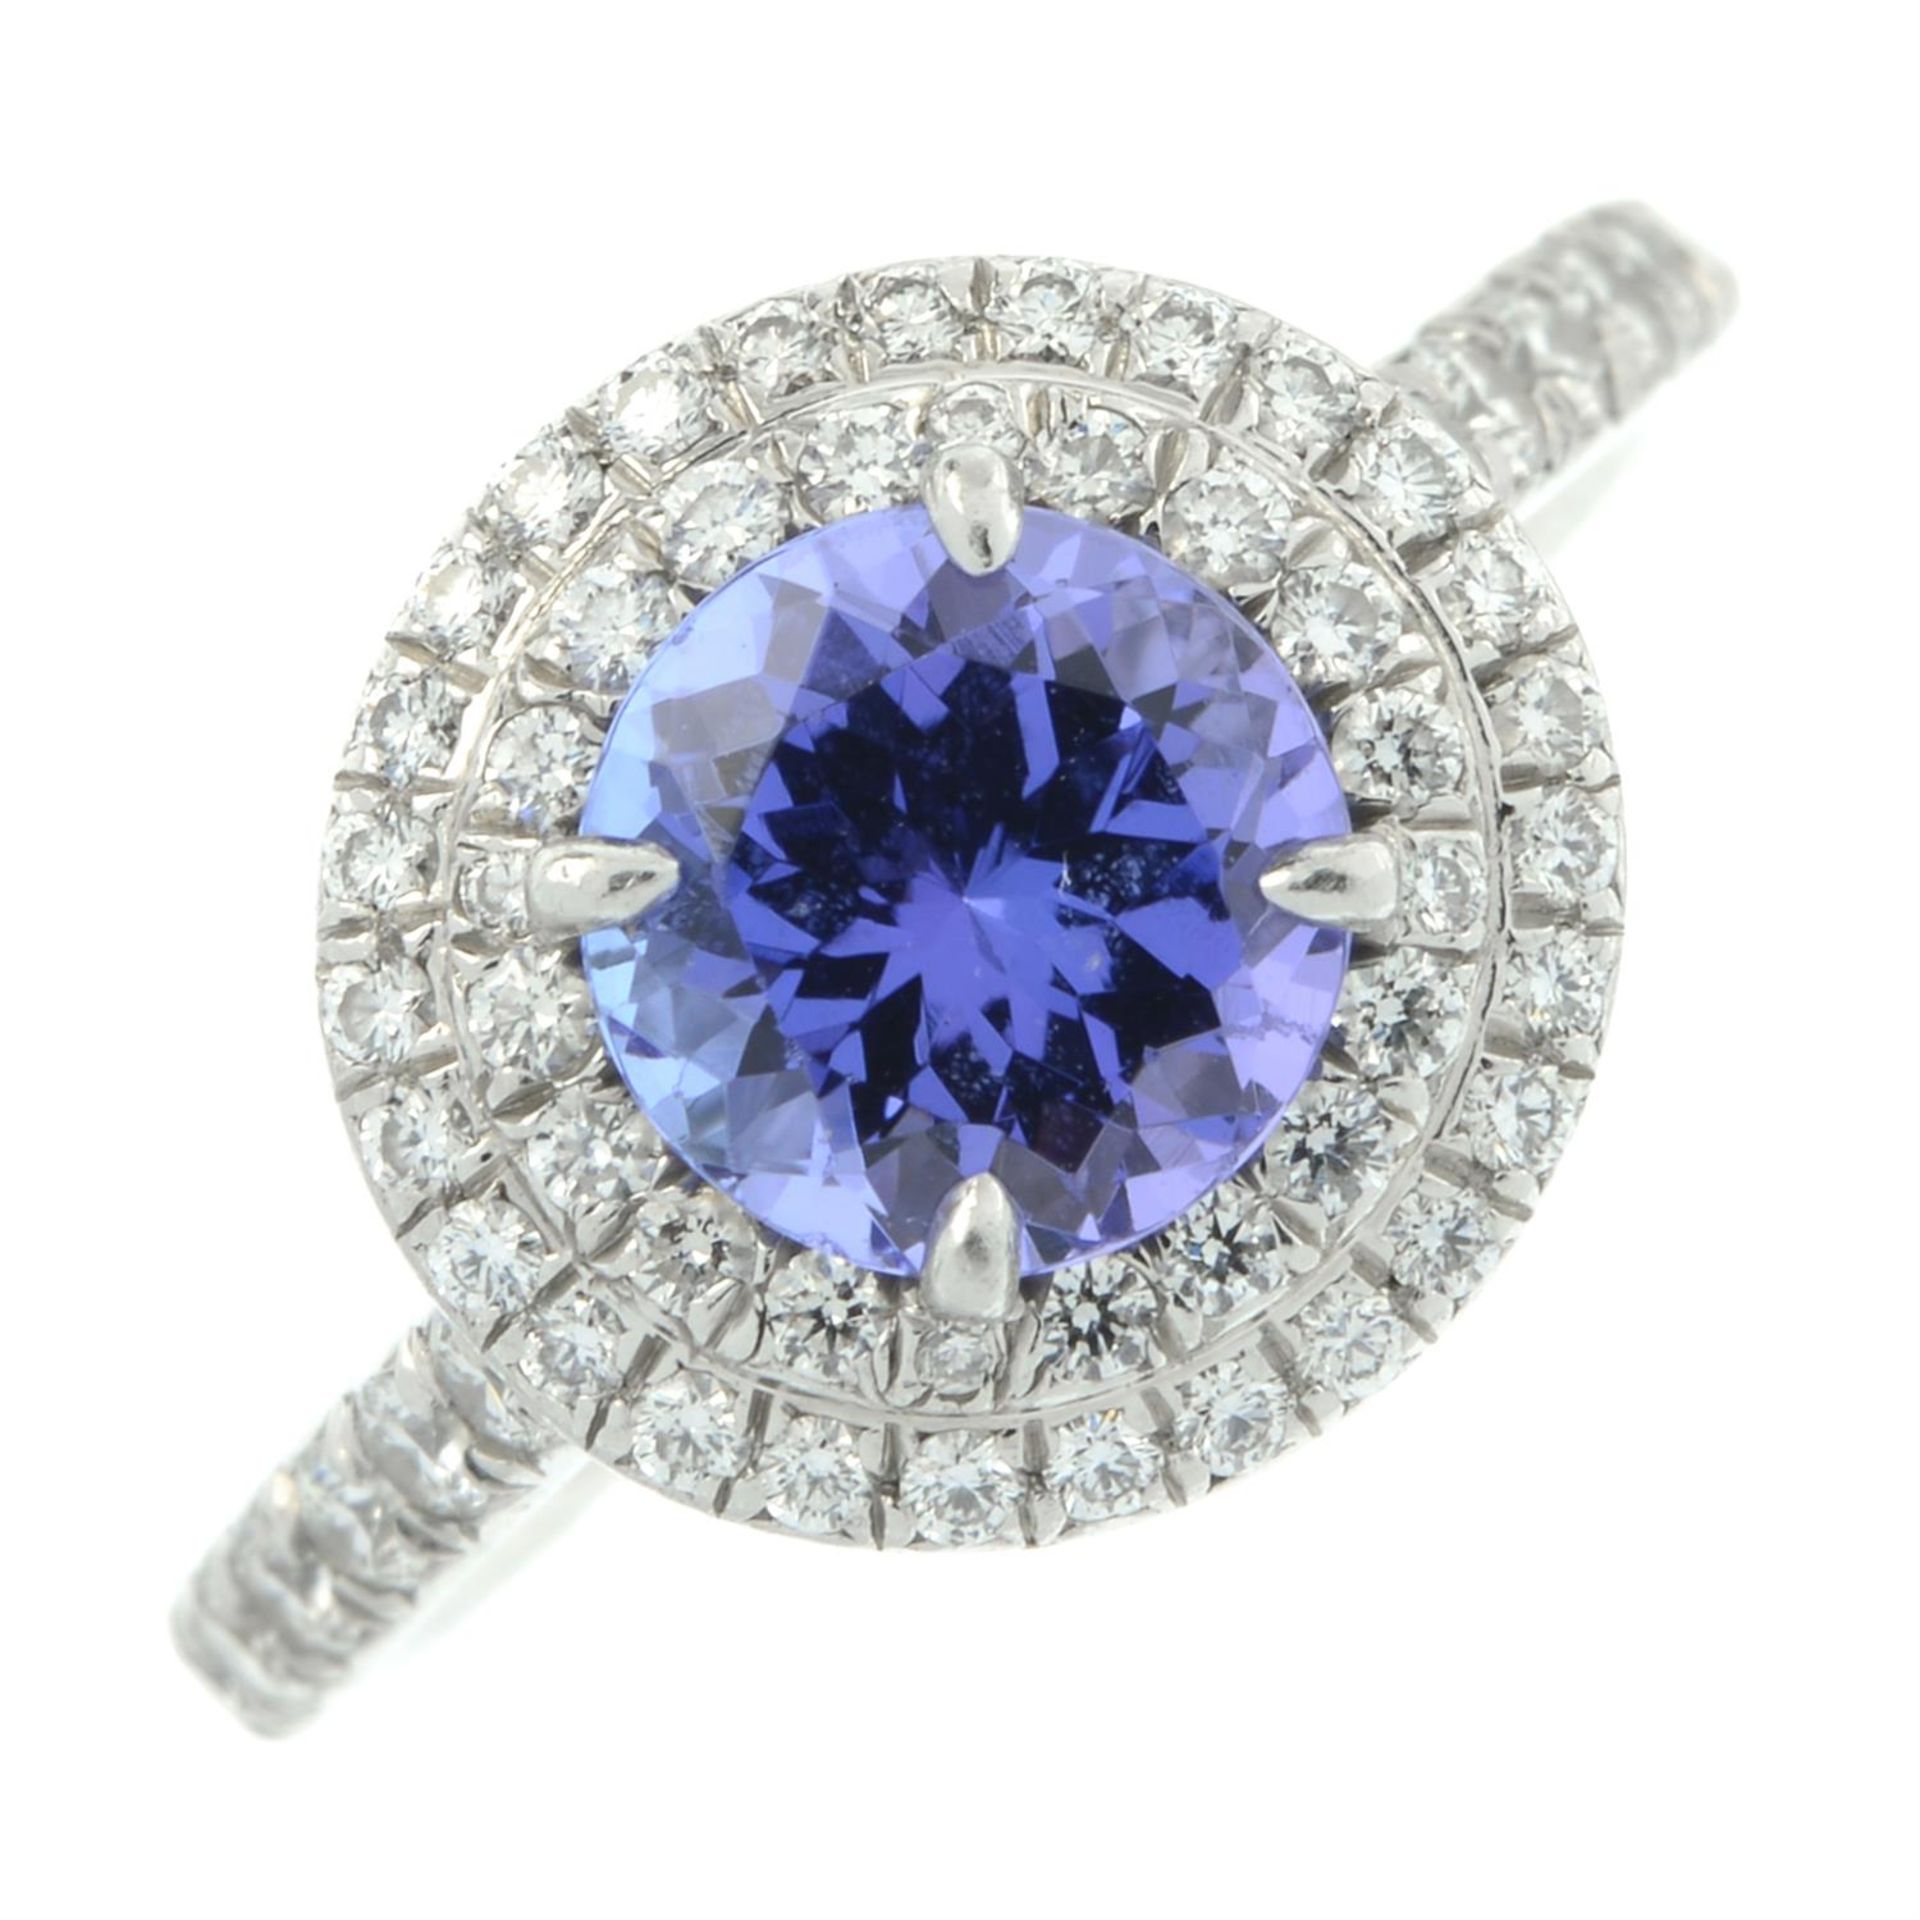 A platinum tanzanite and brilliant-cut diamond cluster ring, by Tiffany & Co. - Image 2 of 5